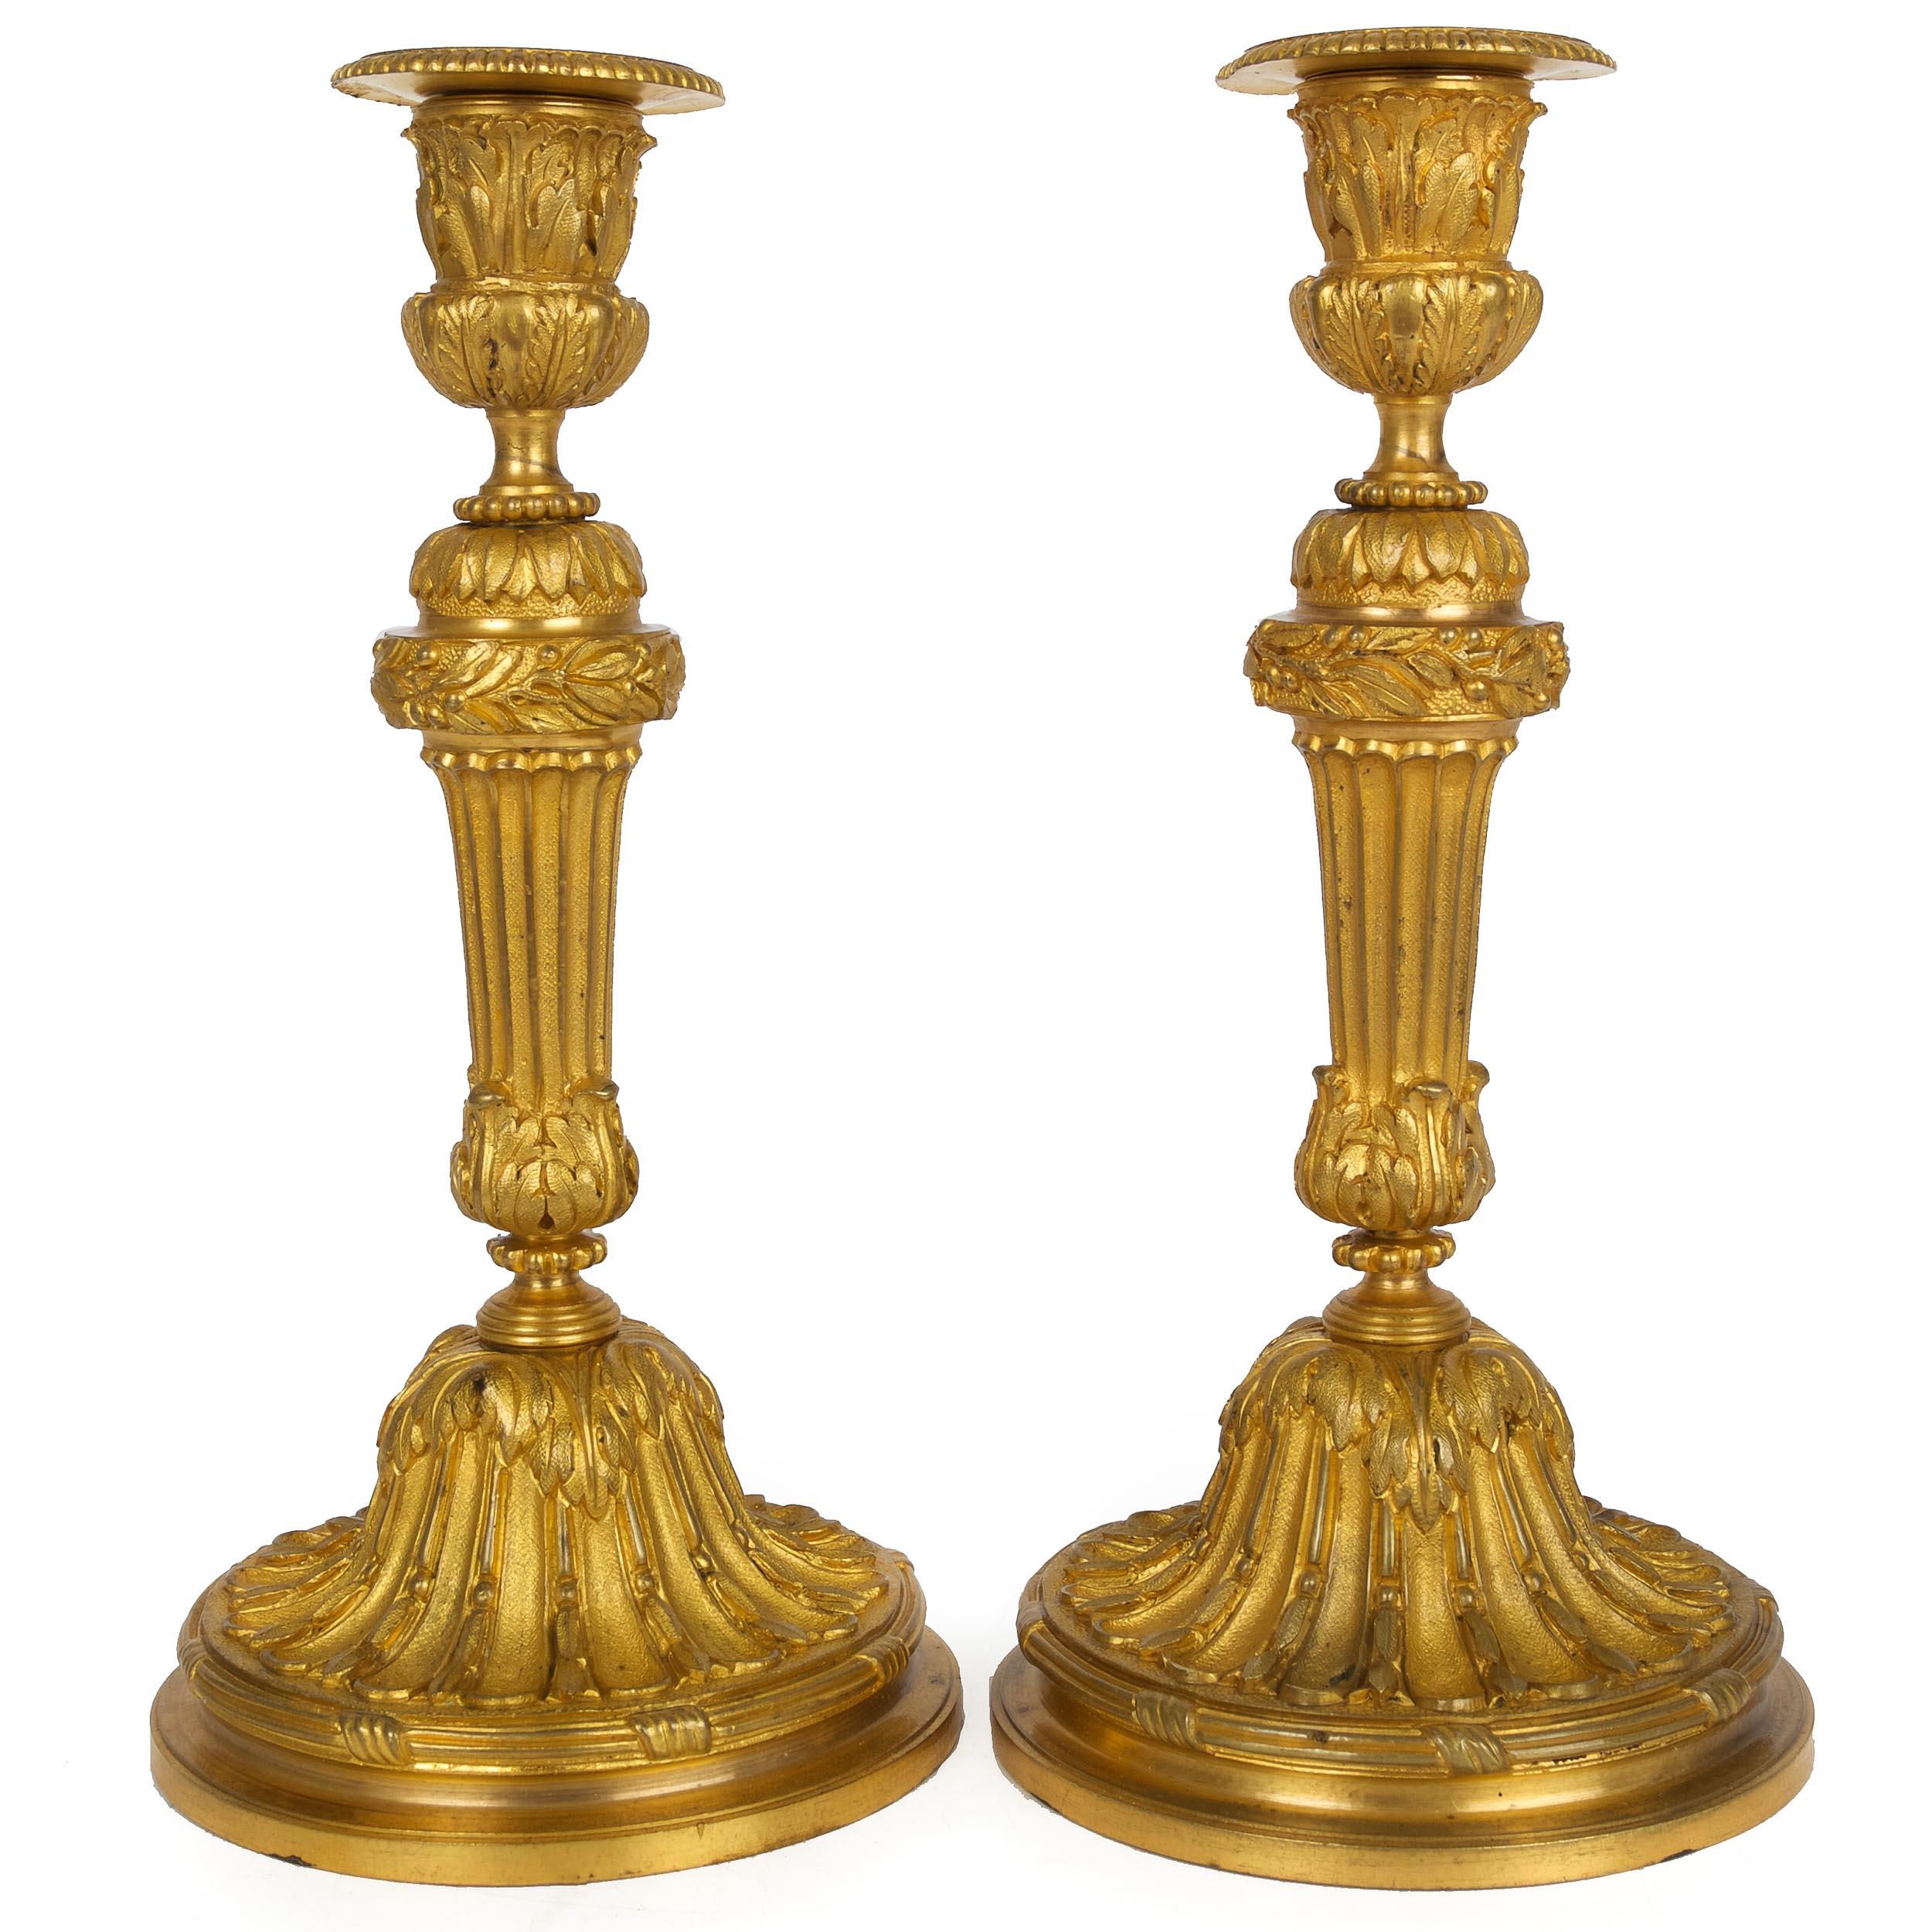 A finely cast 19th century pair of Louis XVI style candlesticks executed in bronze with a brilliant ormolu surface, both are beautifully chiseled and chased. The separately cast drip-catch can be removed from the candle-well for cleaning, this cast